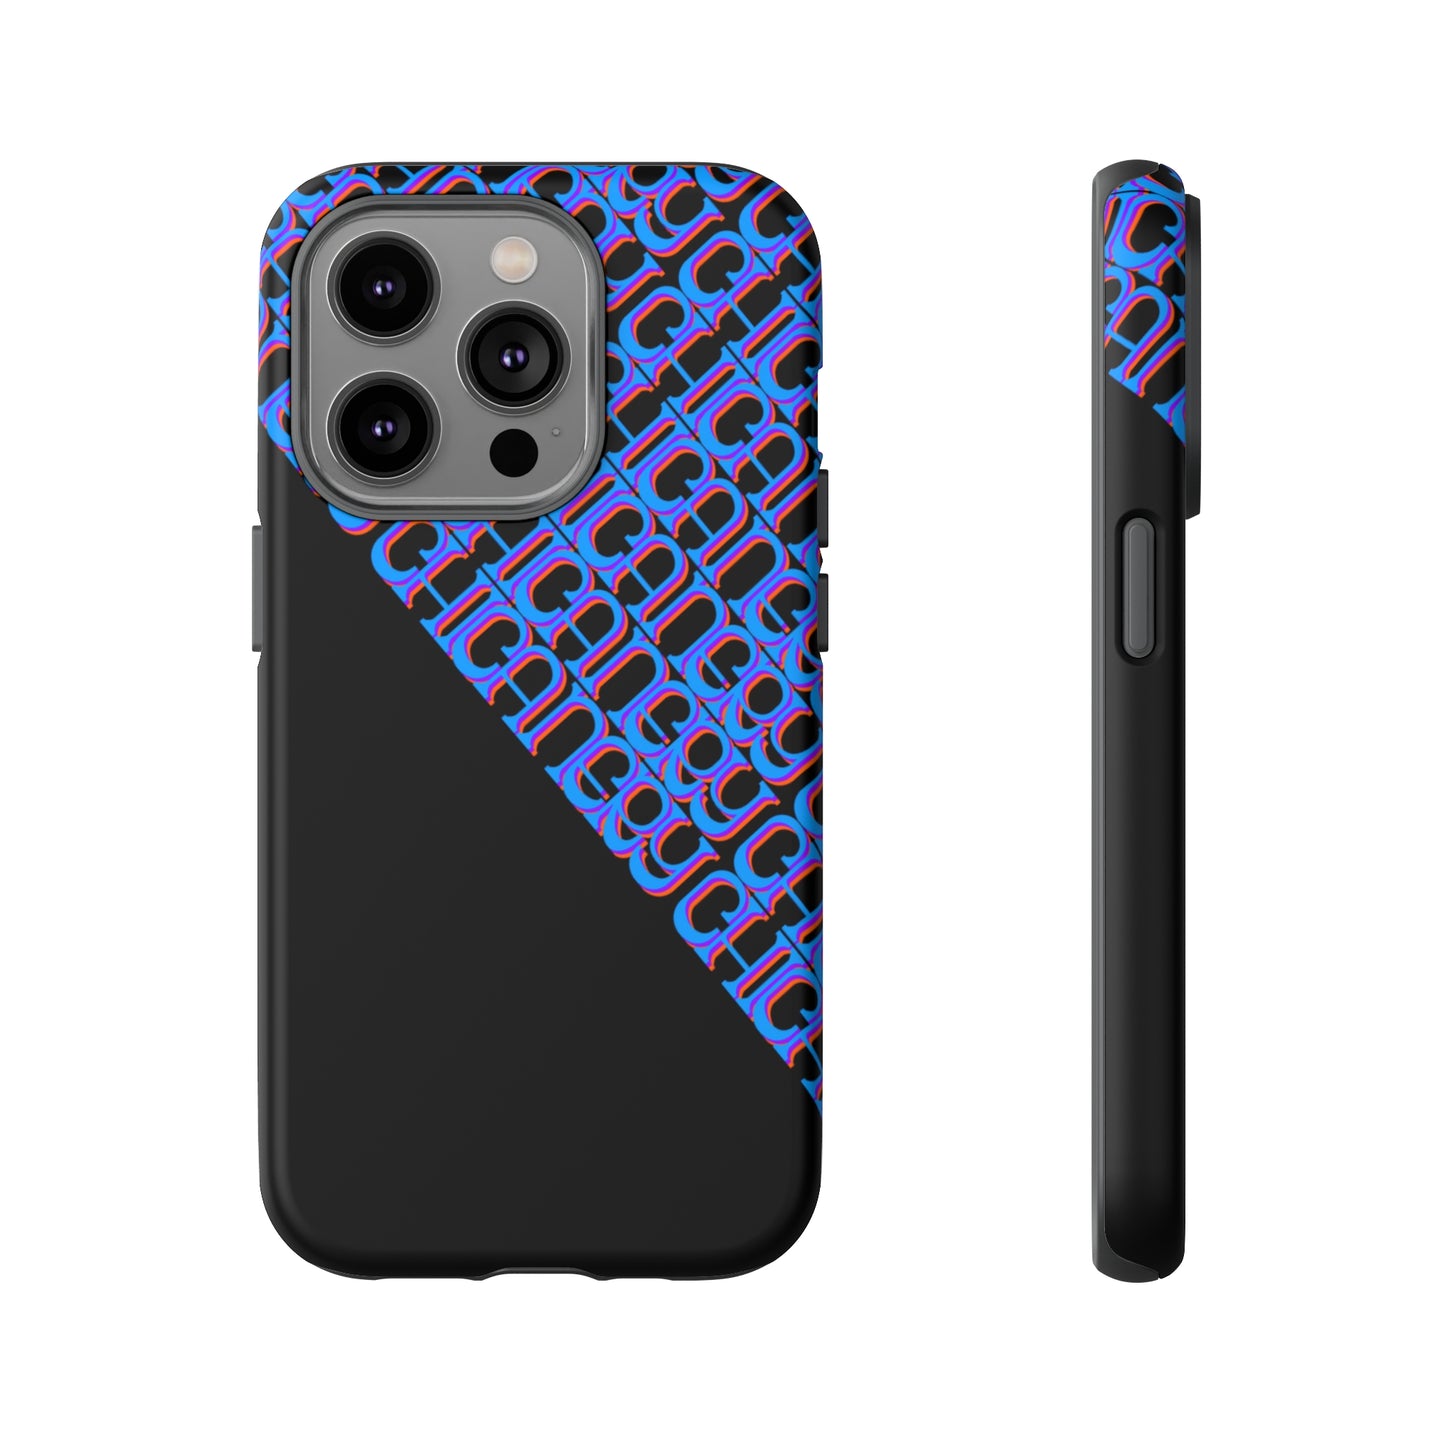 Chicanery™ Neon Phone Case